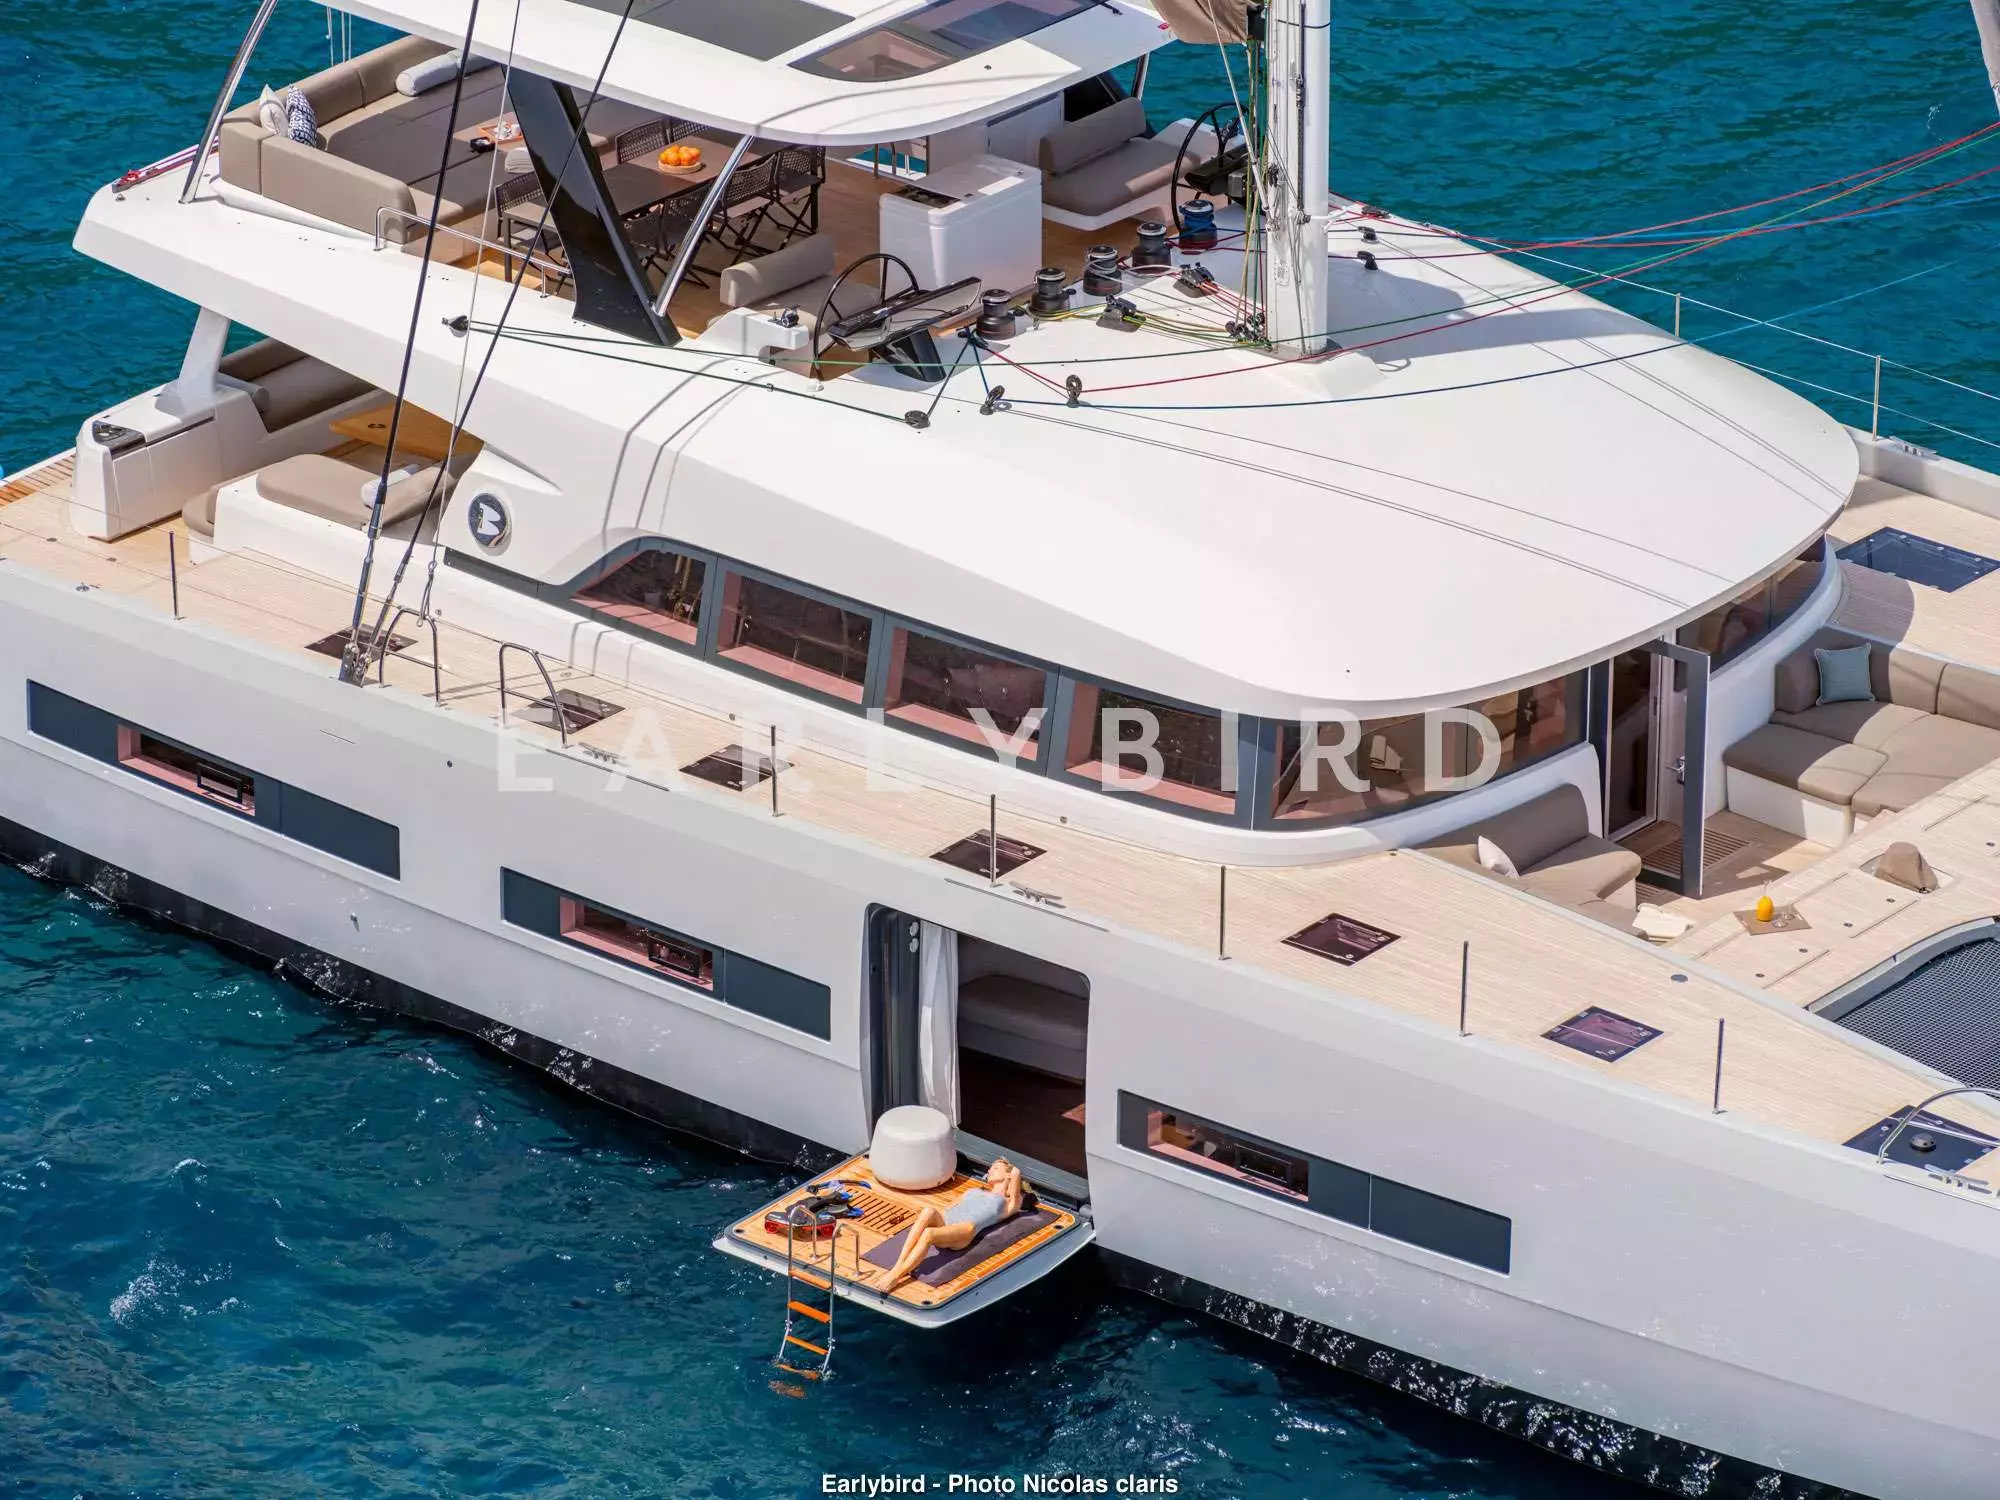 Earlybird by Lagoon - Top rates for a Charter of a private Luxury Catamaran in St Lucia